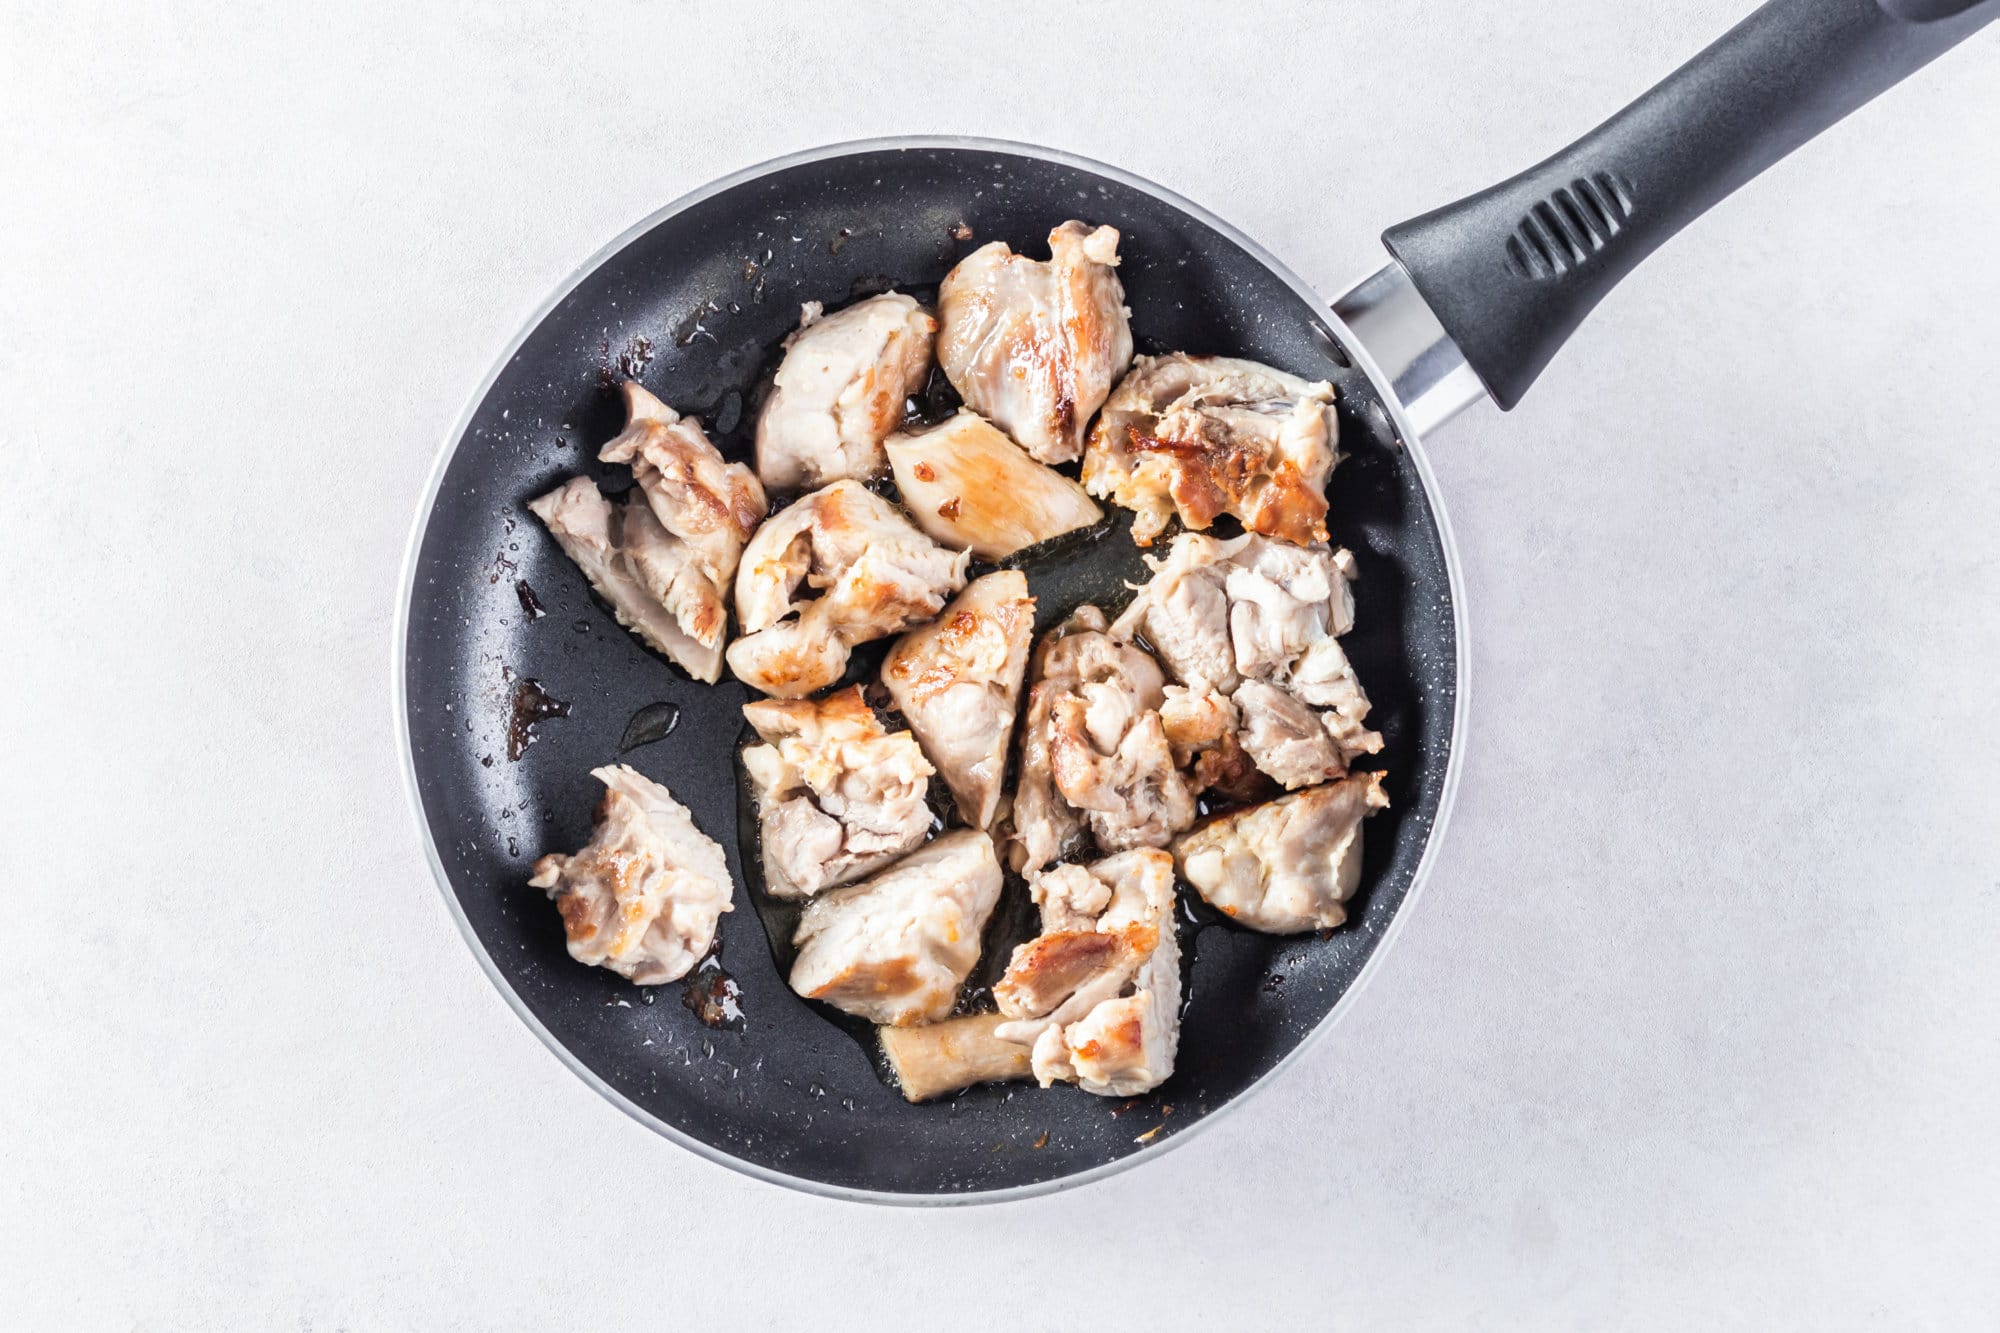 Chicken browning in a skillet while sautéing.